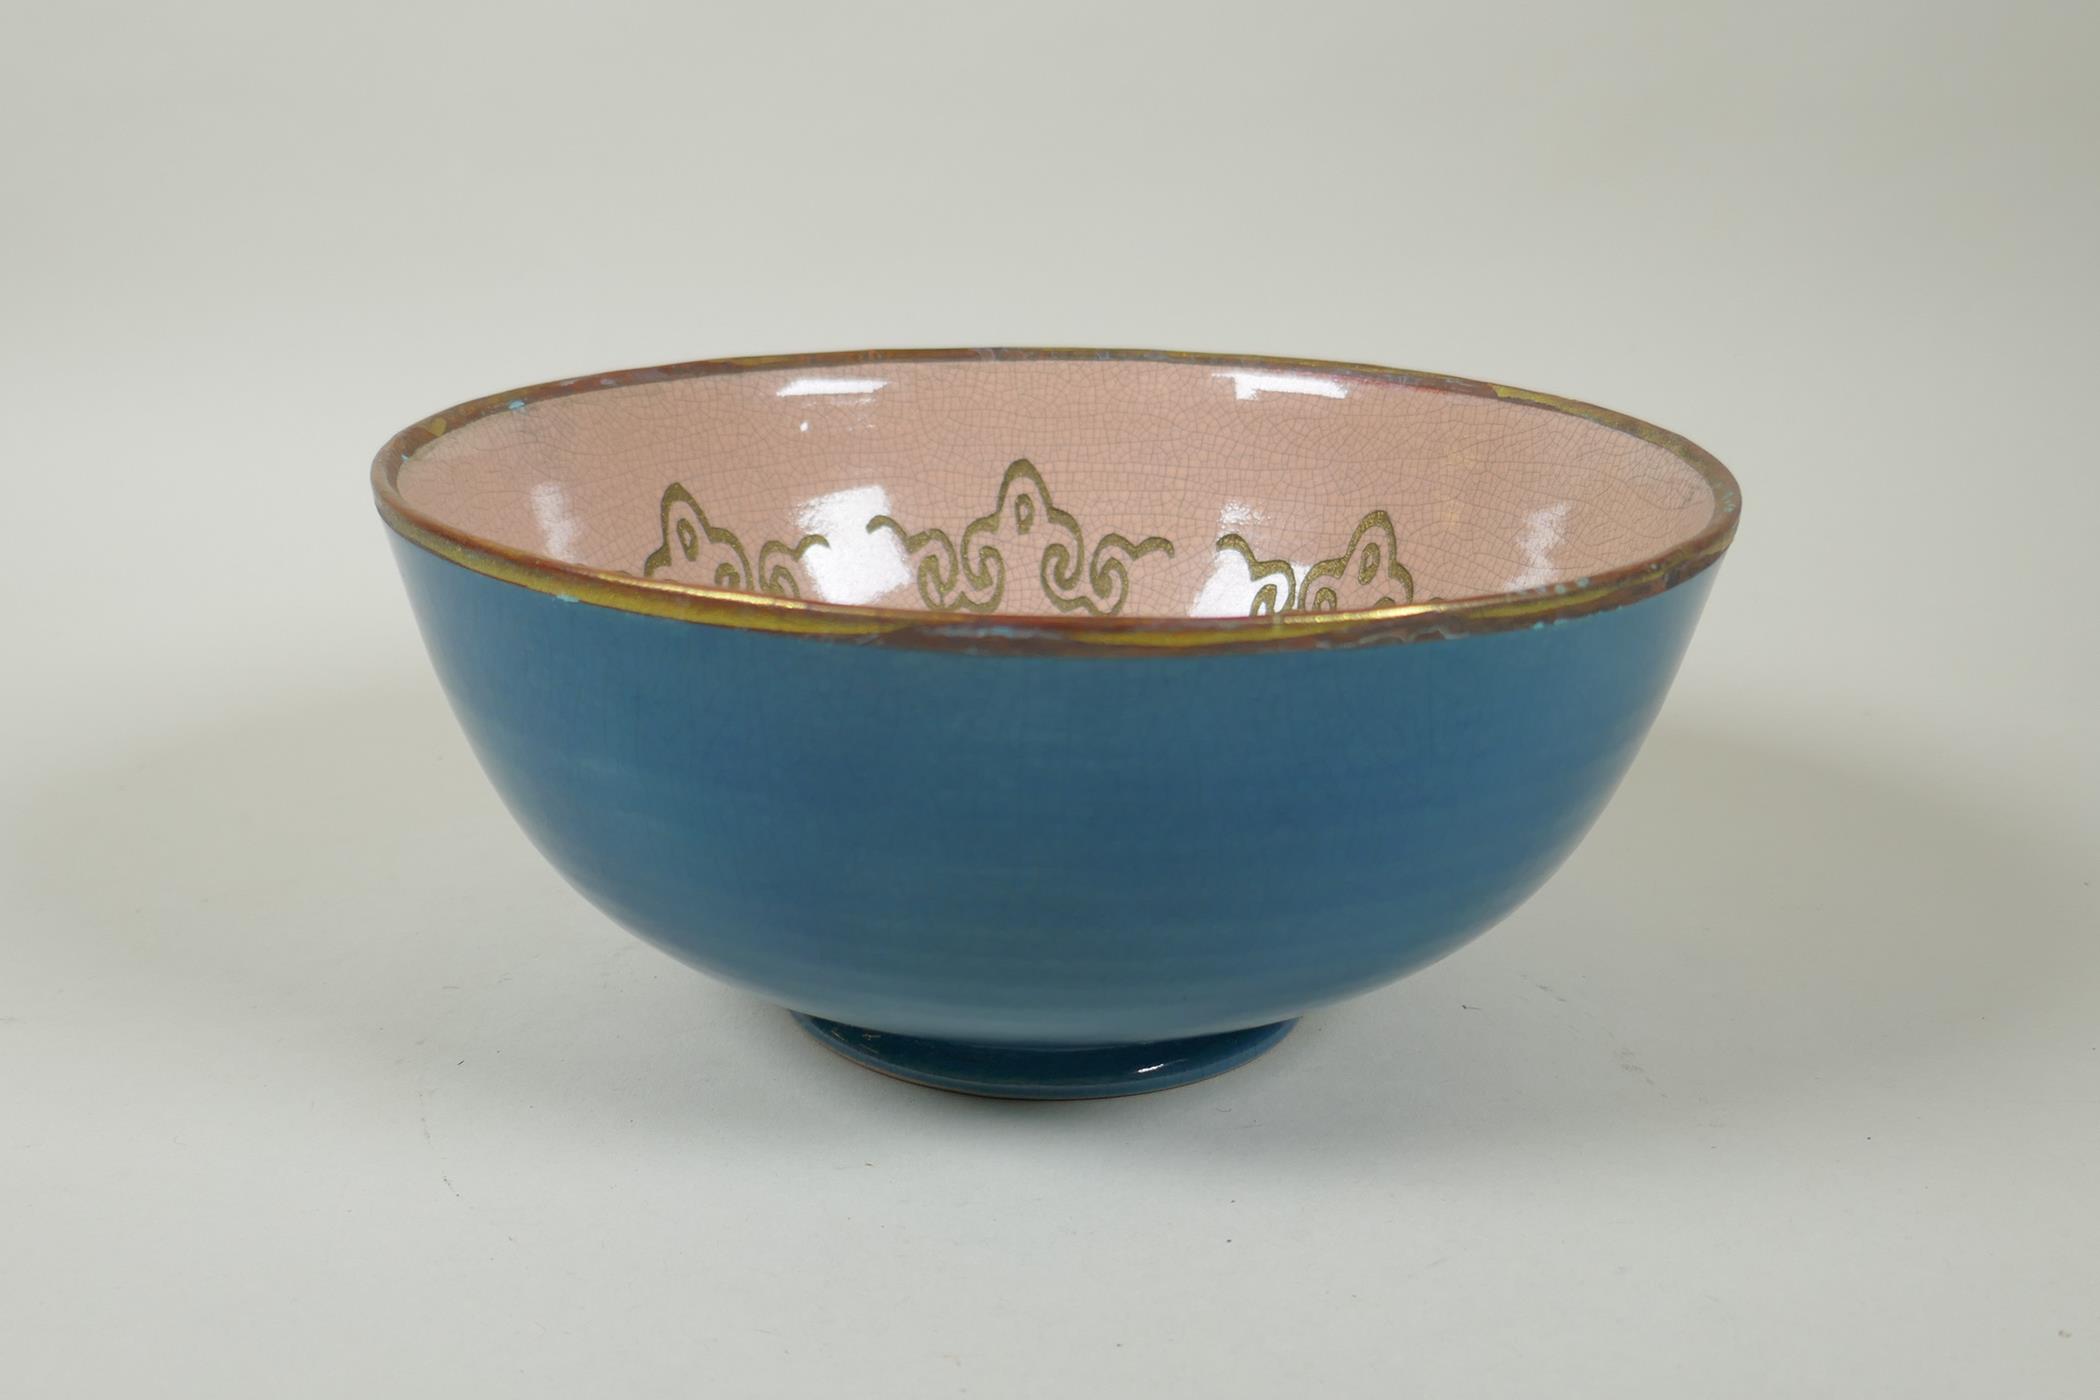 An Oriental teal crackle glazed porcelain bowl with gilt metal rim, the bowl with chased Buddhist